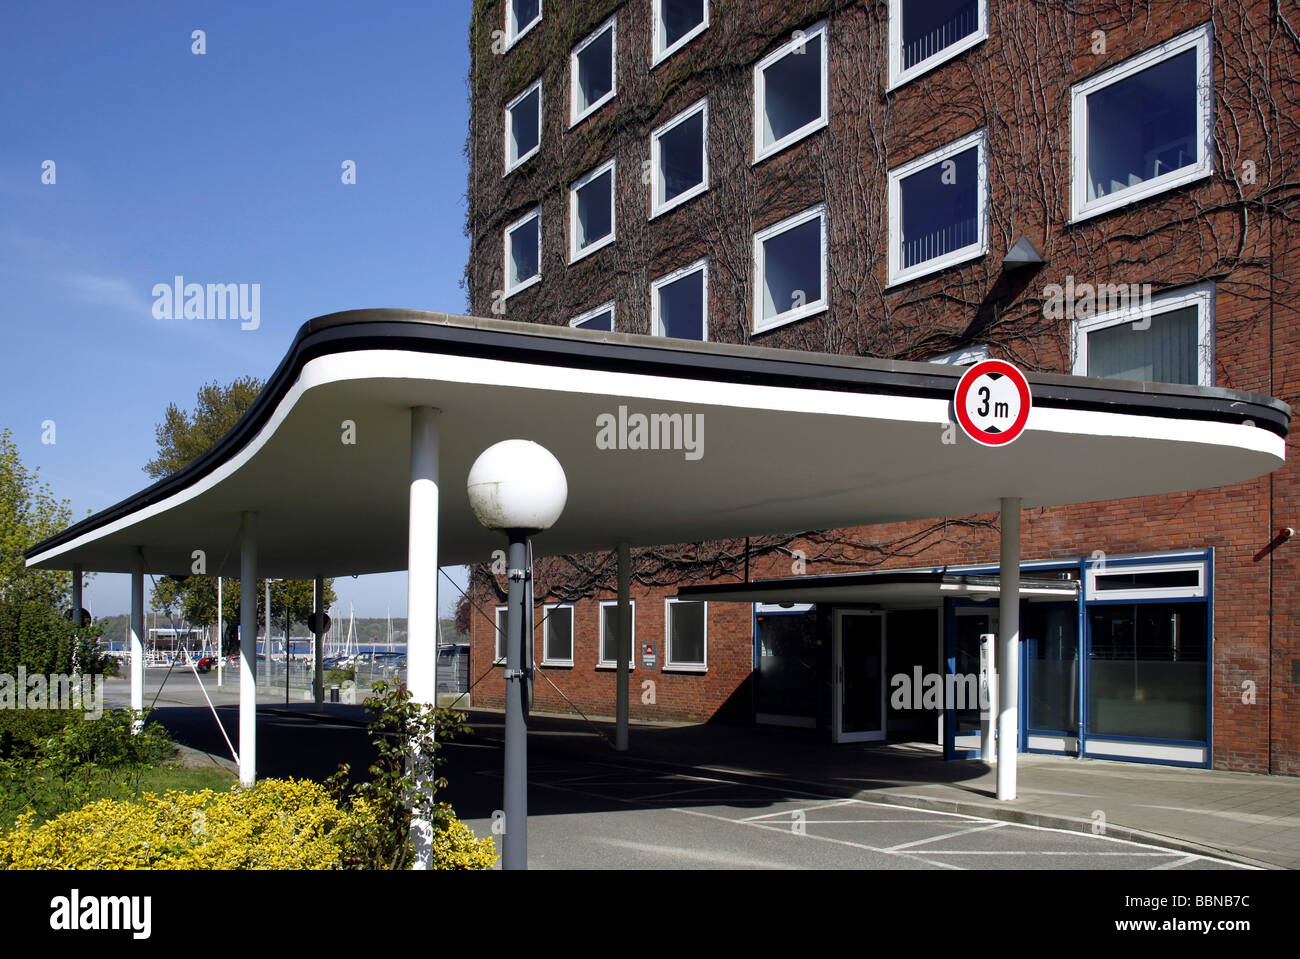 State Chancellery of Schleswig-Holstein, official residence of the Prime Minister, government district, Kiel, Schleswig-Holstei Stock Photo